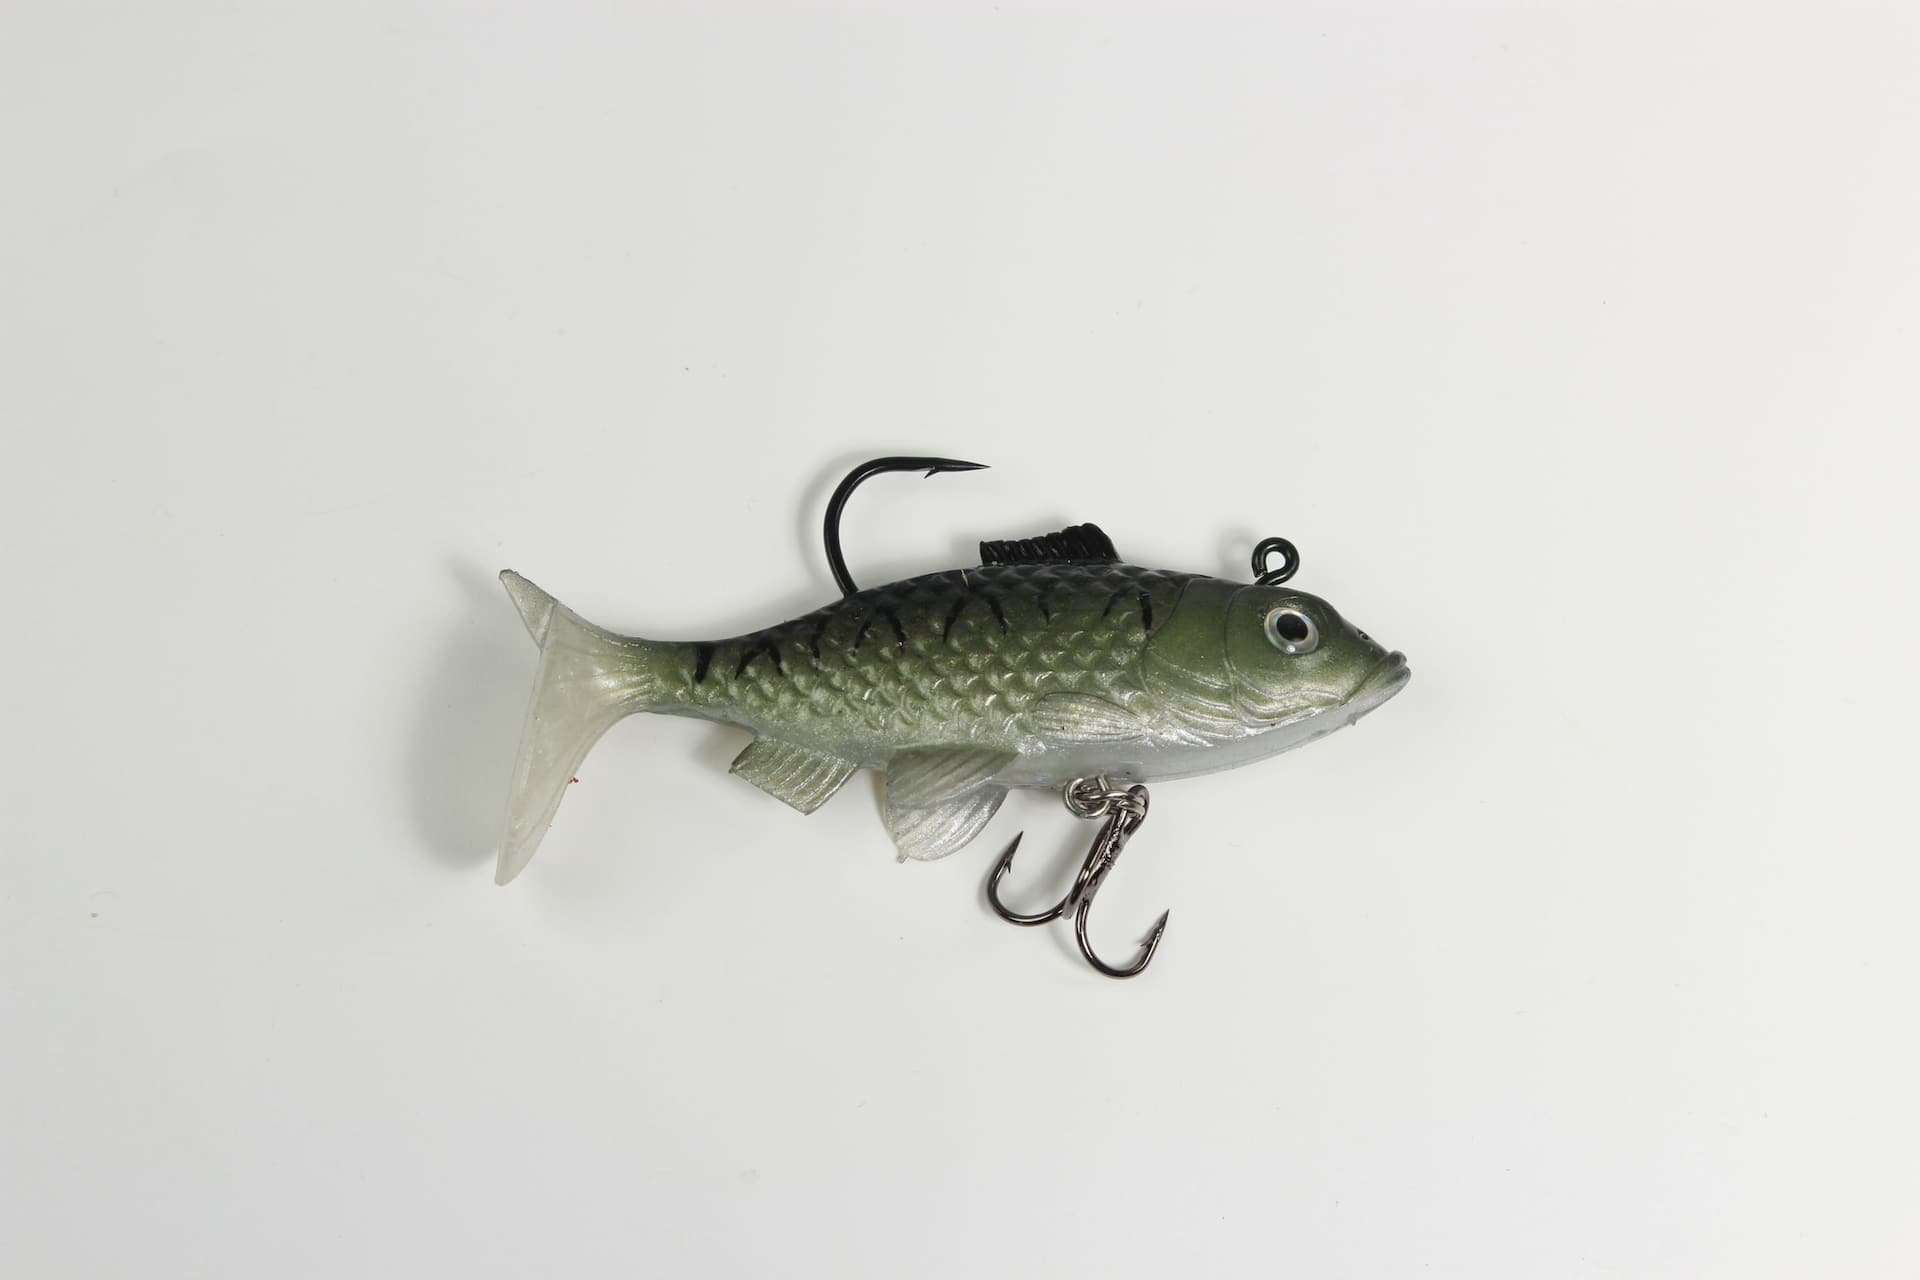 https://media-www.canadiantire.ca/product/playing/fishing/fishing-lures/0774076/xcalibur-live-shiner-2--c3dfc309-0f60-4b54-9cc6-7d7da3a202f1-jpgrendition.jpg